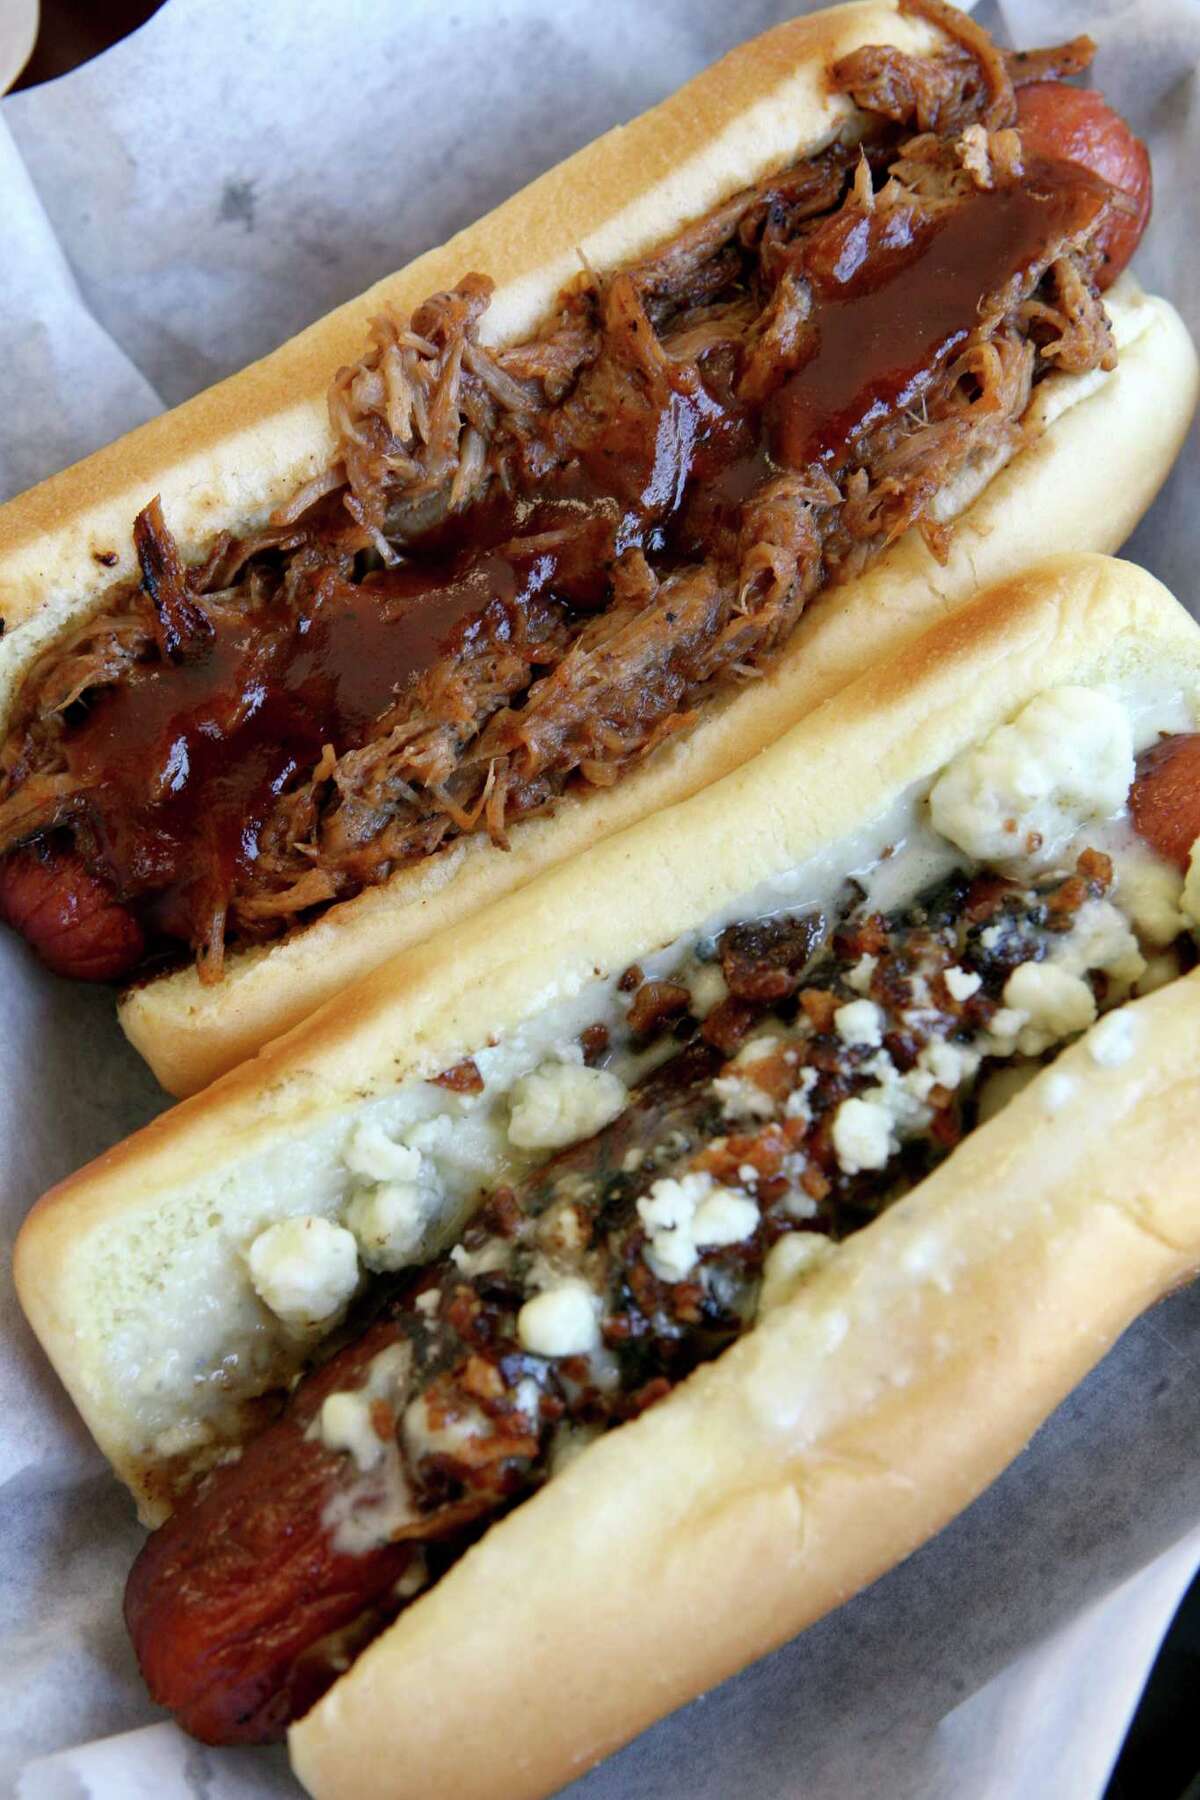 The pork dog (top) and the SA dog are served at the Original San Antonio Hot Dog House, which won Readers' Choice Best Hot Dog.